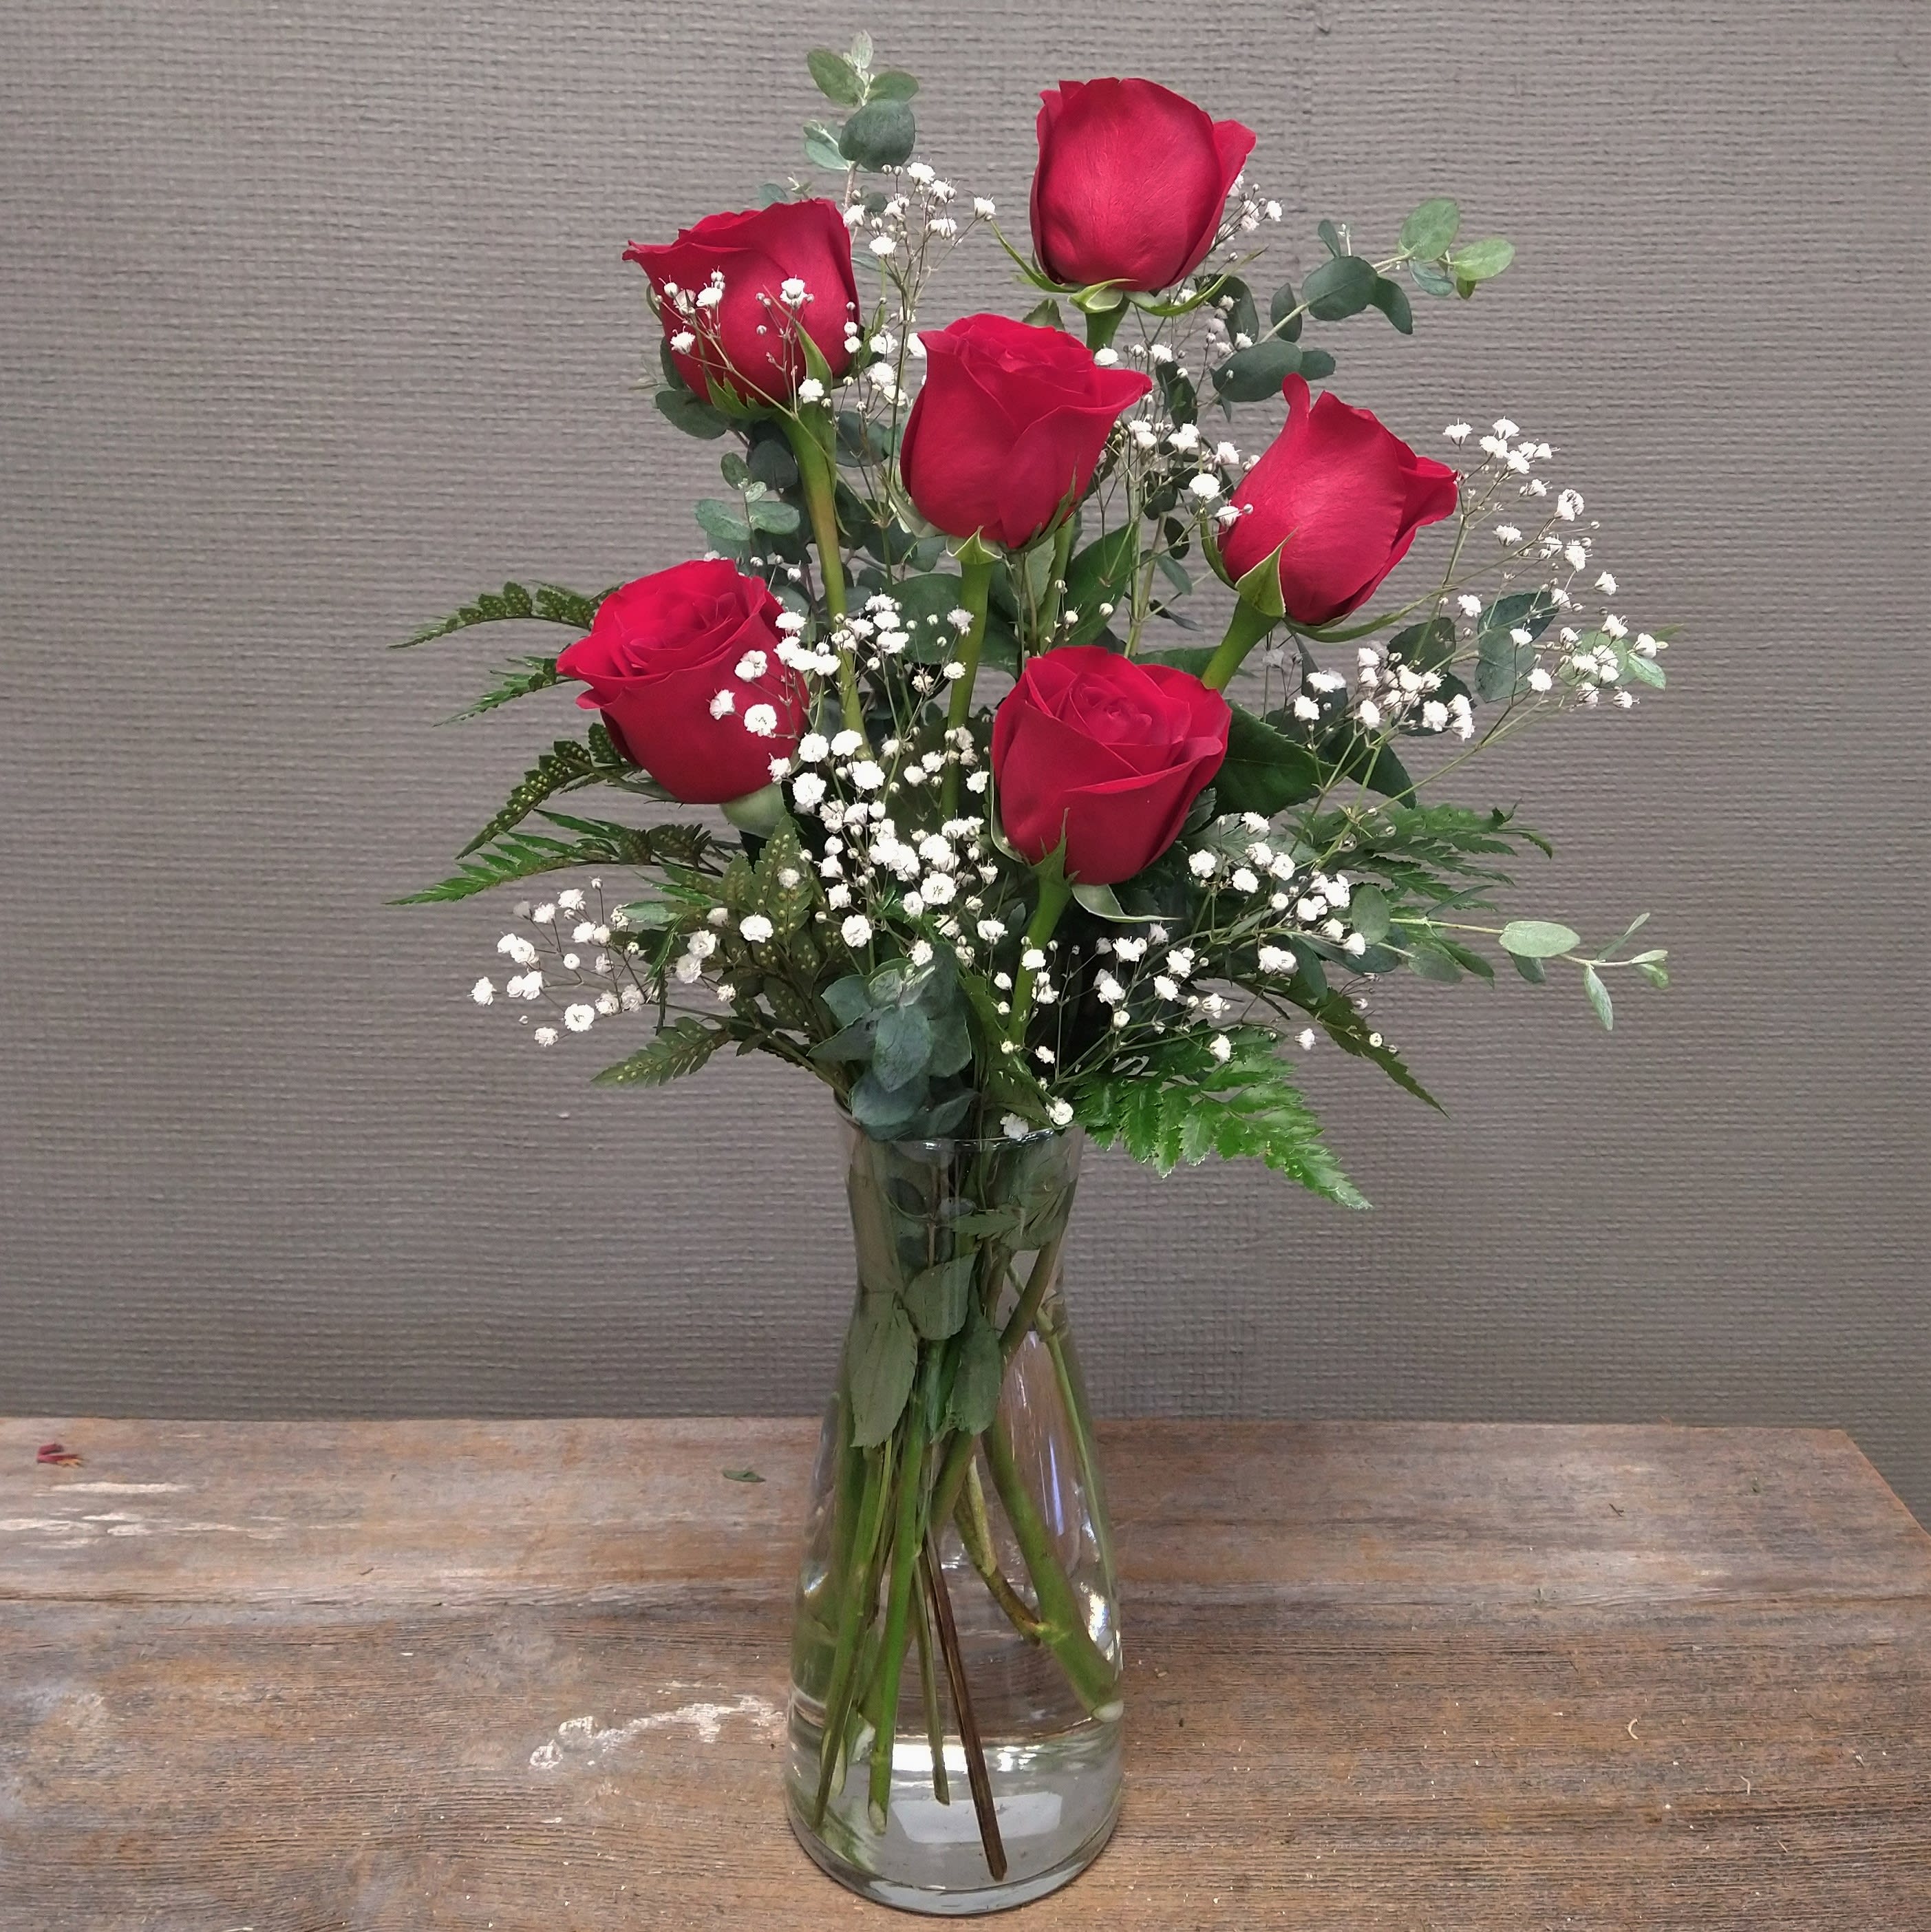 Half of My Heart - A half dozen red roses with greens and filler. A taller presentation of 6 roses. Great for smaller spaces. Please specify if you would like a different color.